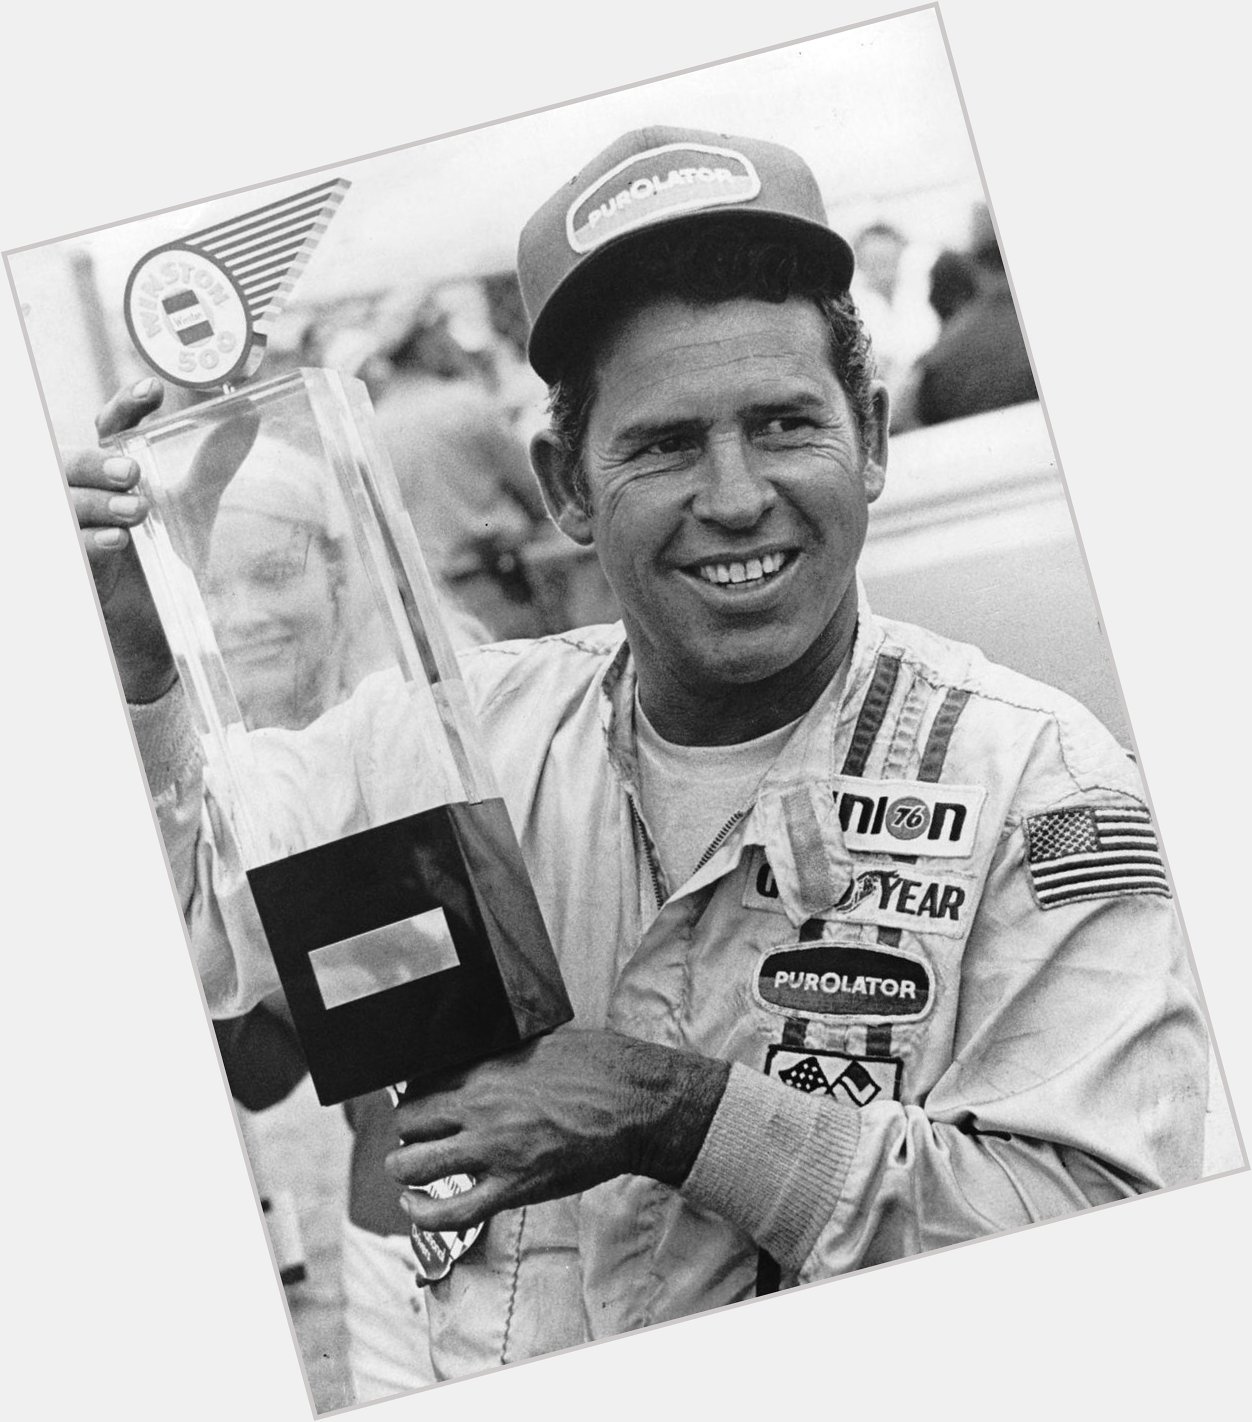 To join us in wishing 2011 inductee David Pearson aka The Silver Fox a happy 80th birthday! 